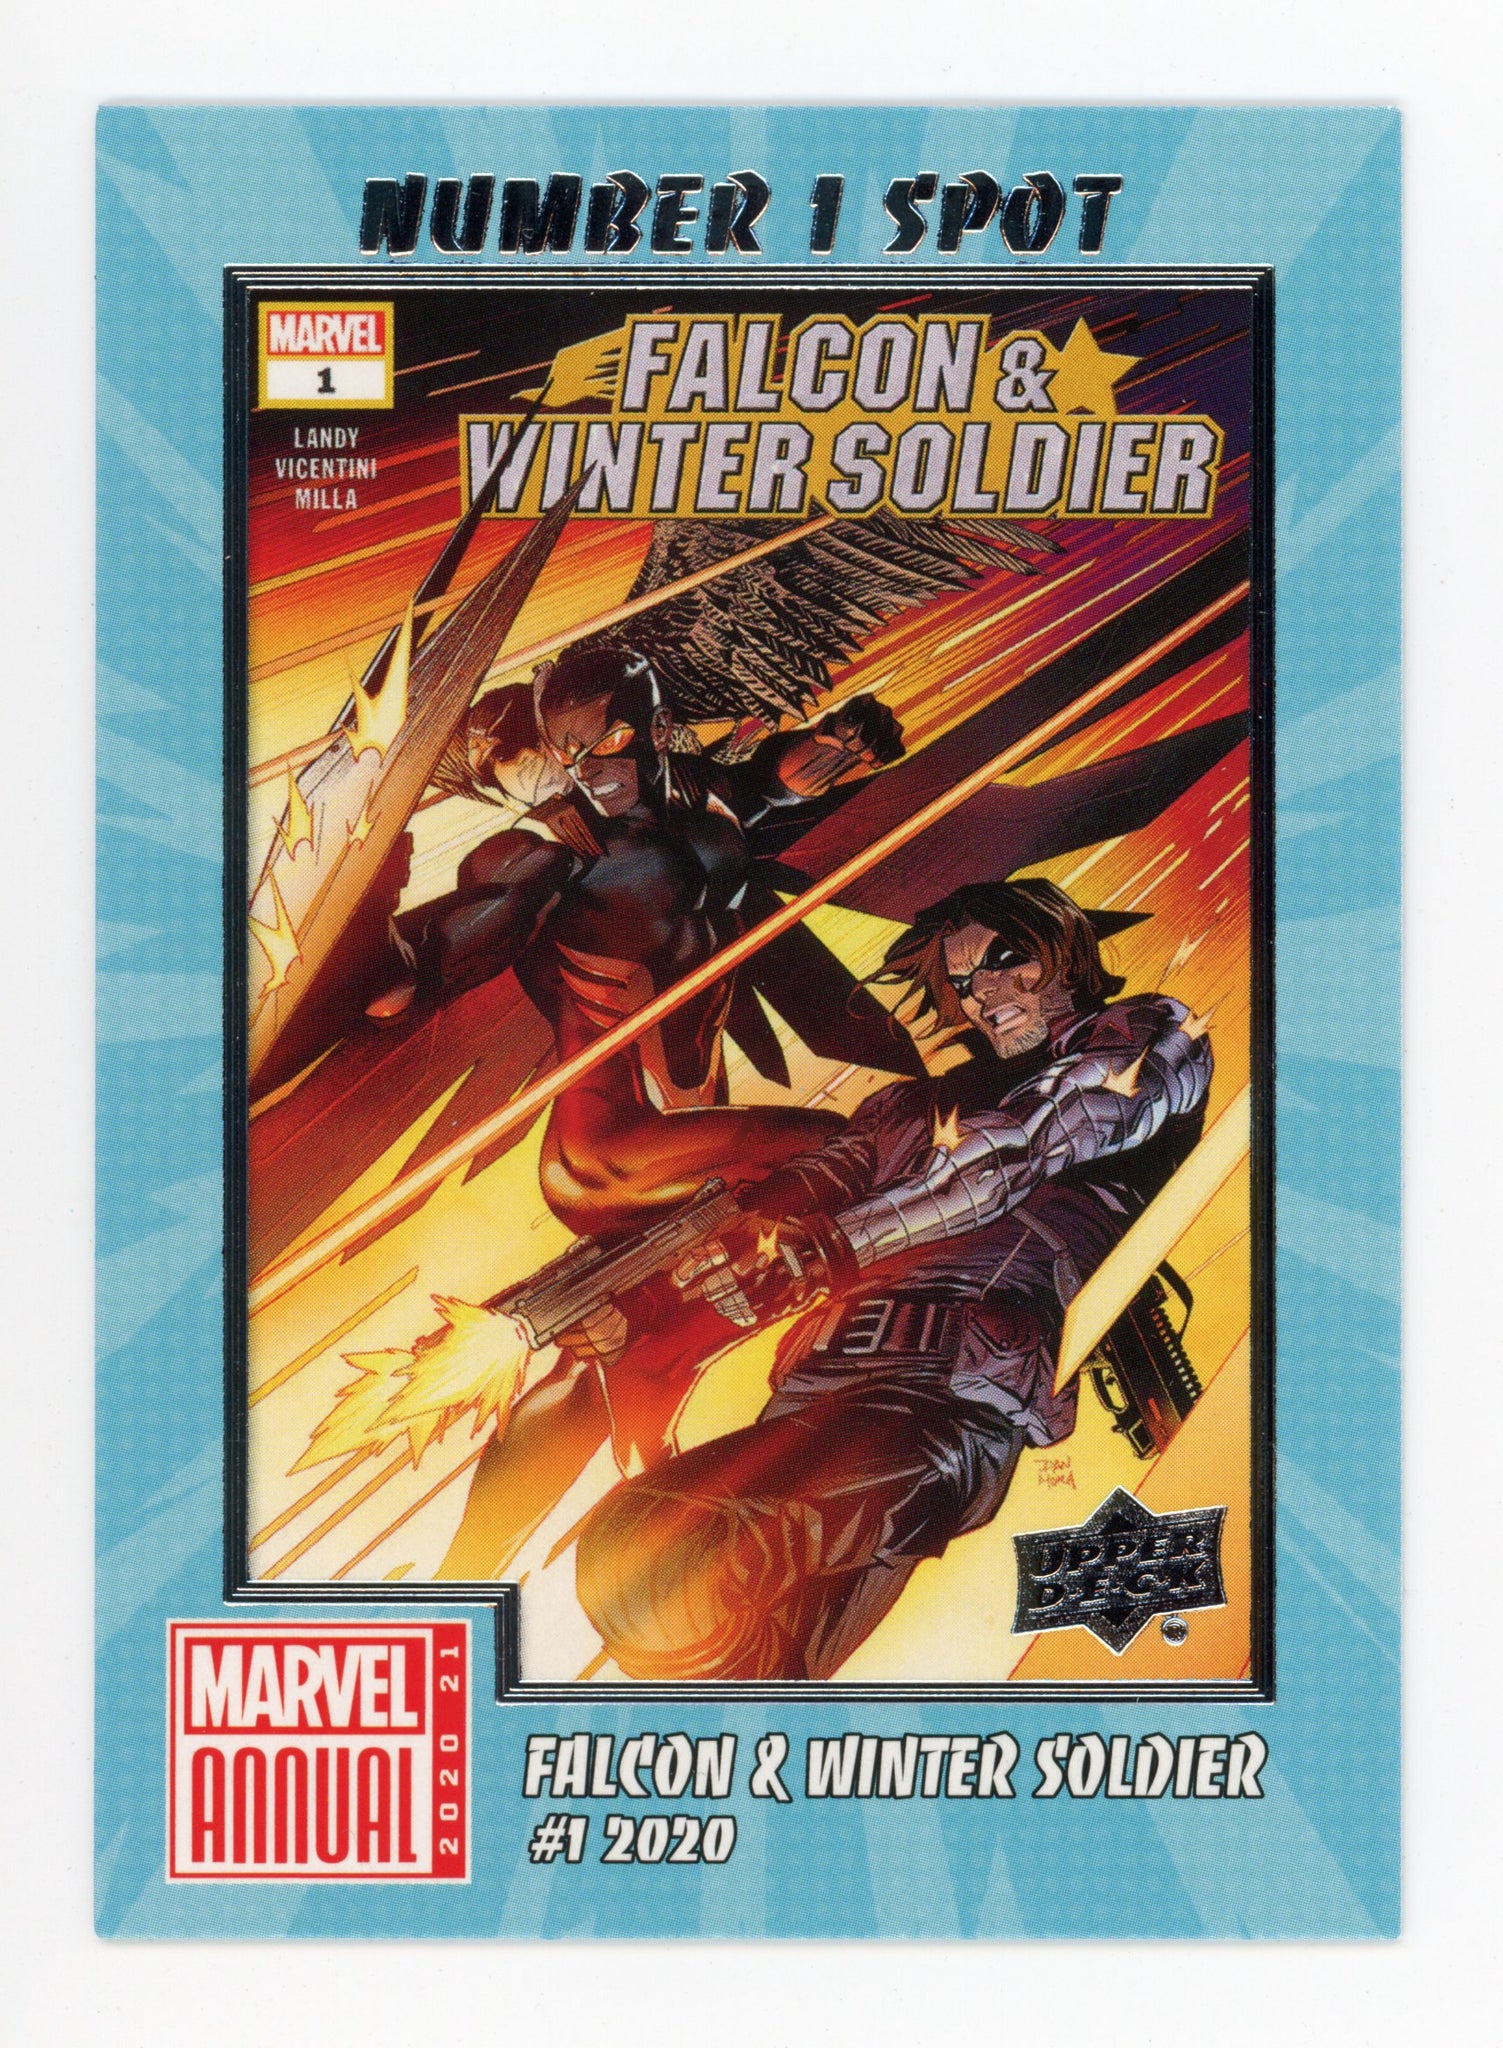 2020-2021 Falcon & Winter Soldier Number 1 Spot Upper Deck Marvel Annual # N1S-19